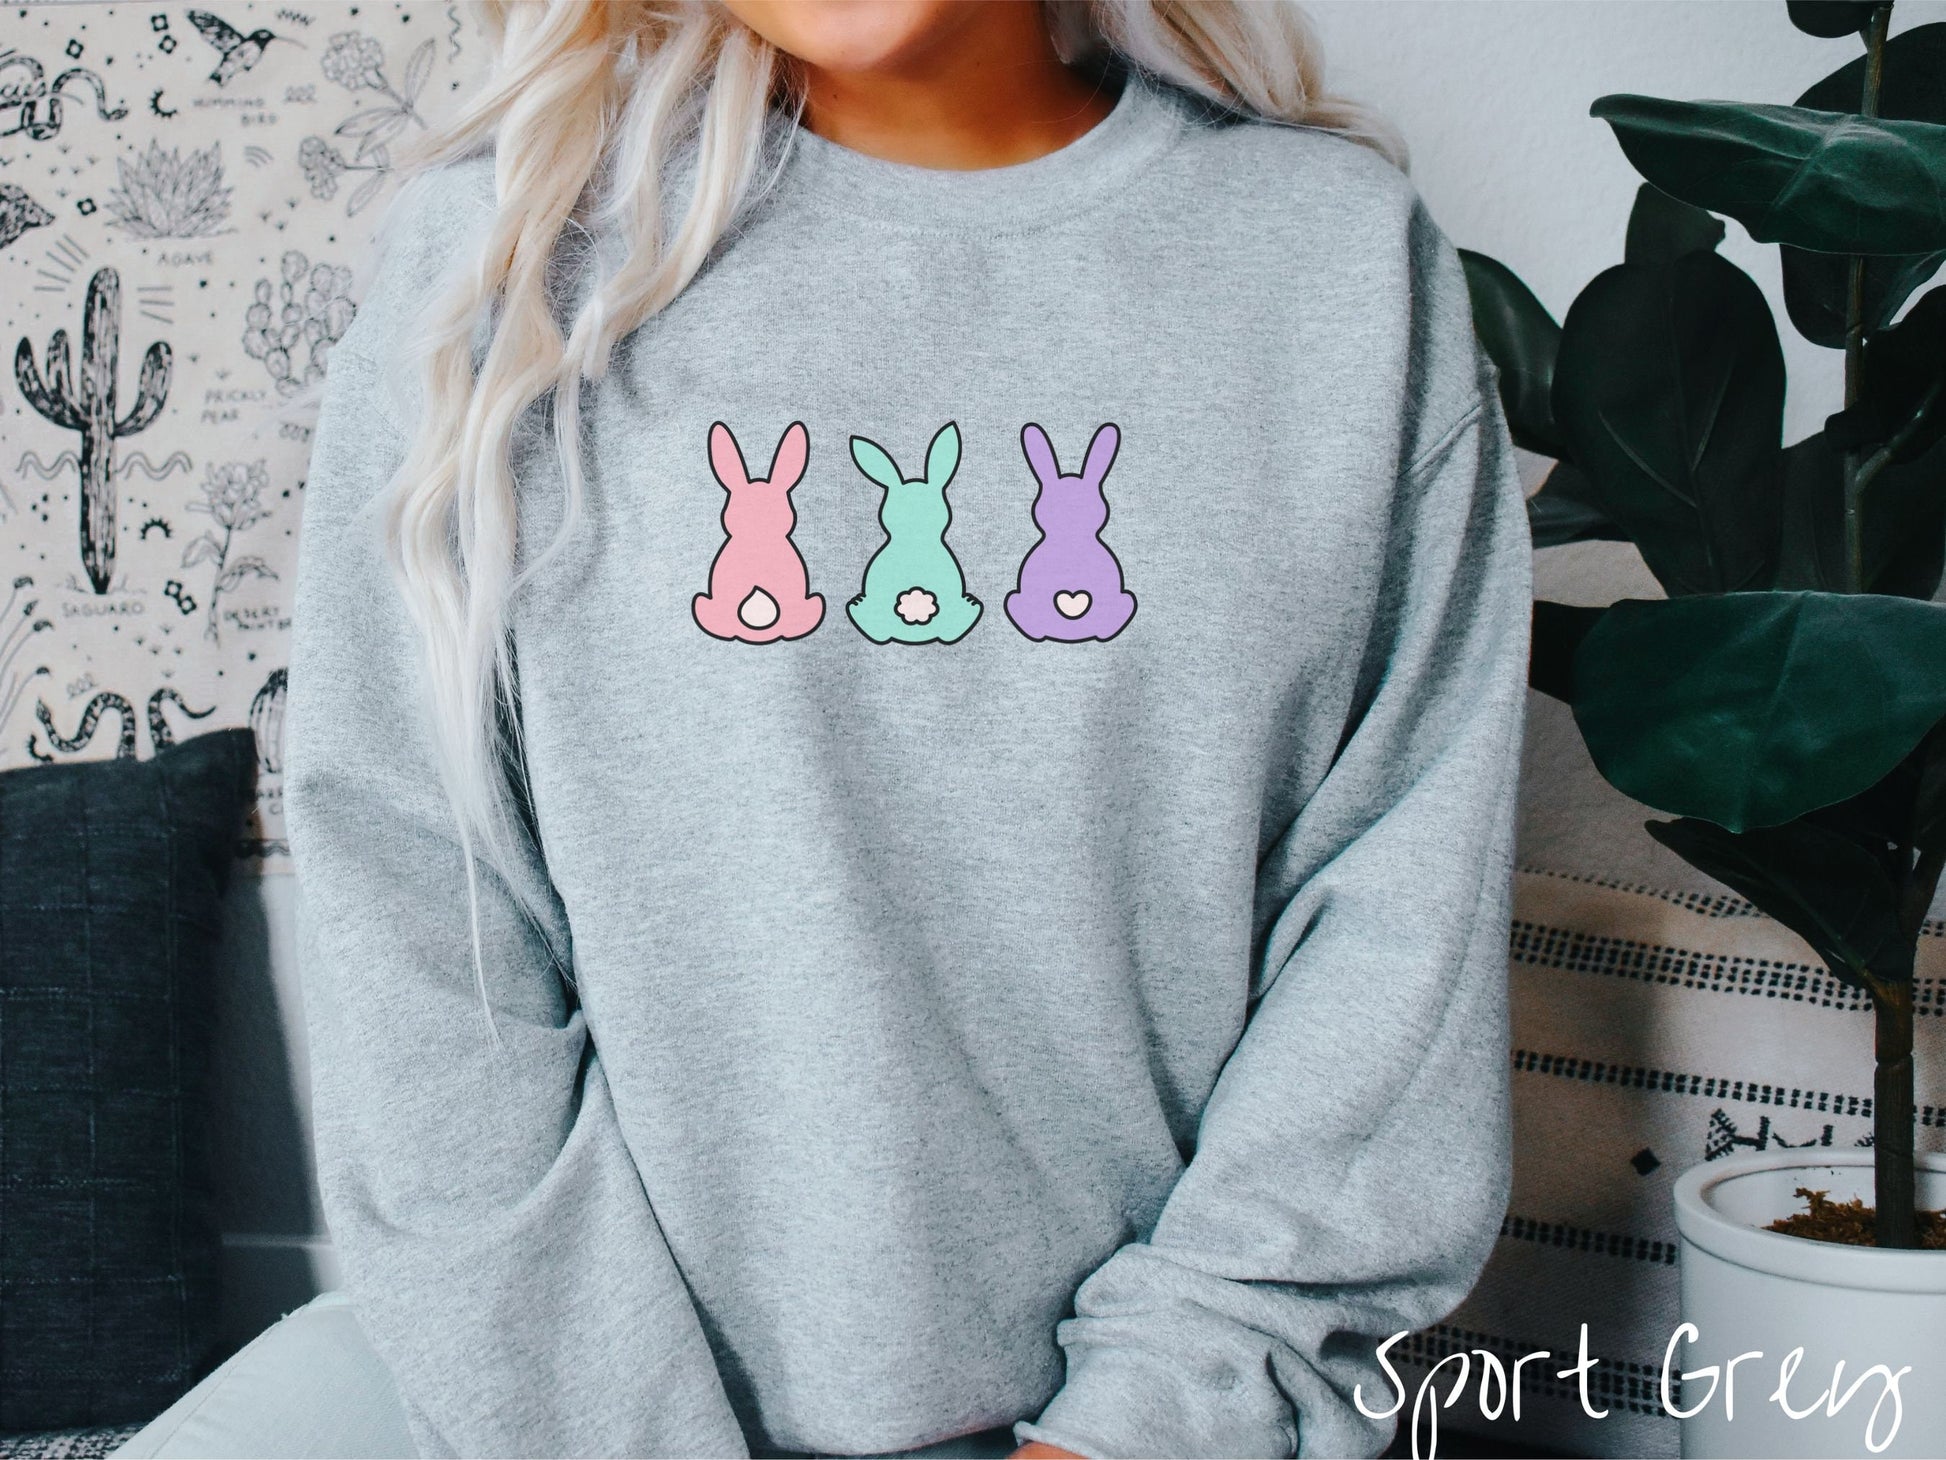 A woman wearing a cute, vintage sport grey colored sweatshirt with three colorful bunny rabbits sitting facing away. One is pink with a white tail, another bay with white tail, and the third is purple with a white, heart-shaped tail.